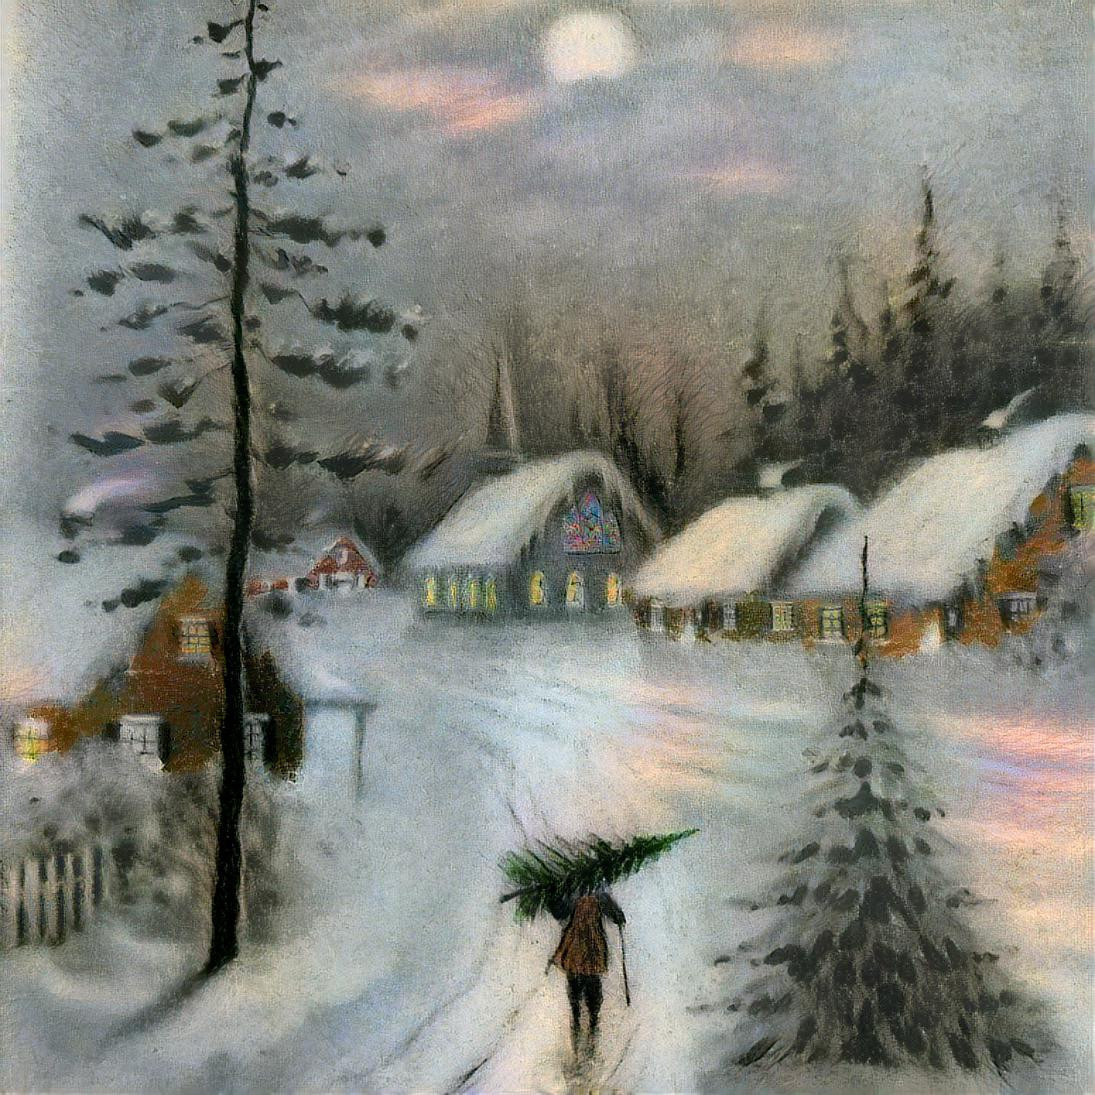 A peaceful simplicity in soft focus - One vintage card lightly touched up and one Anton Mauve winter landscape.